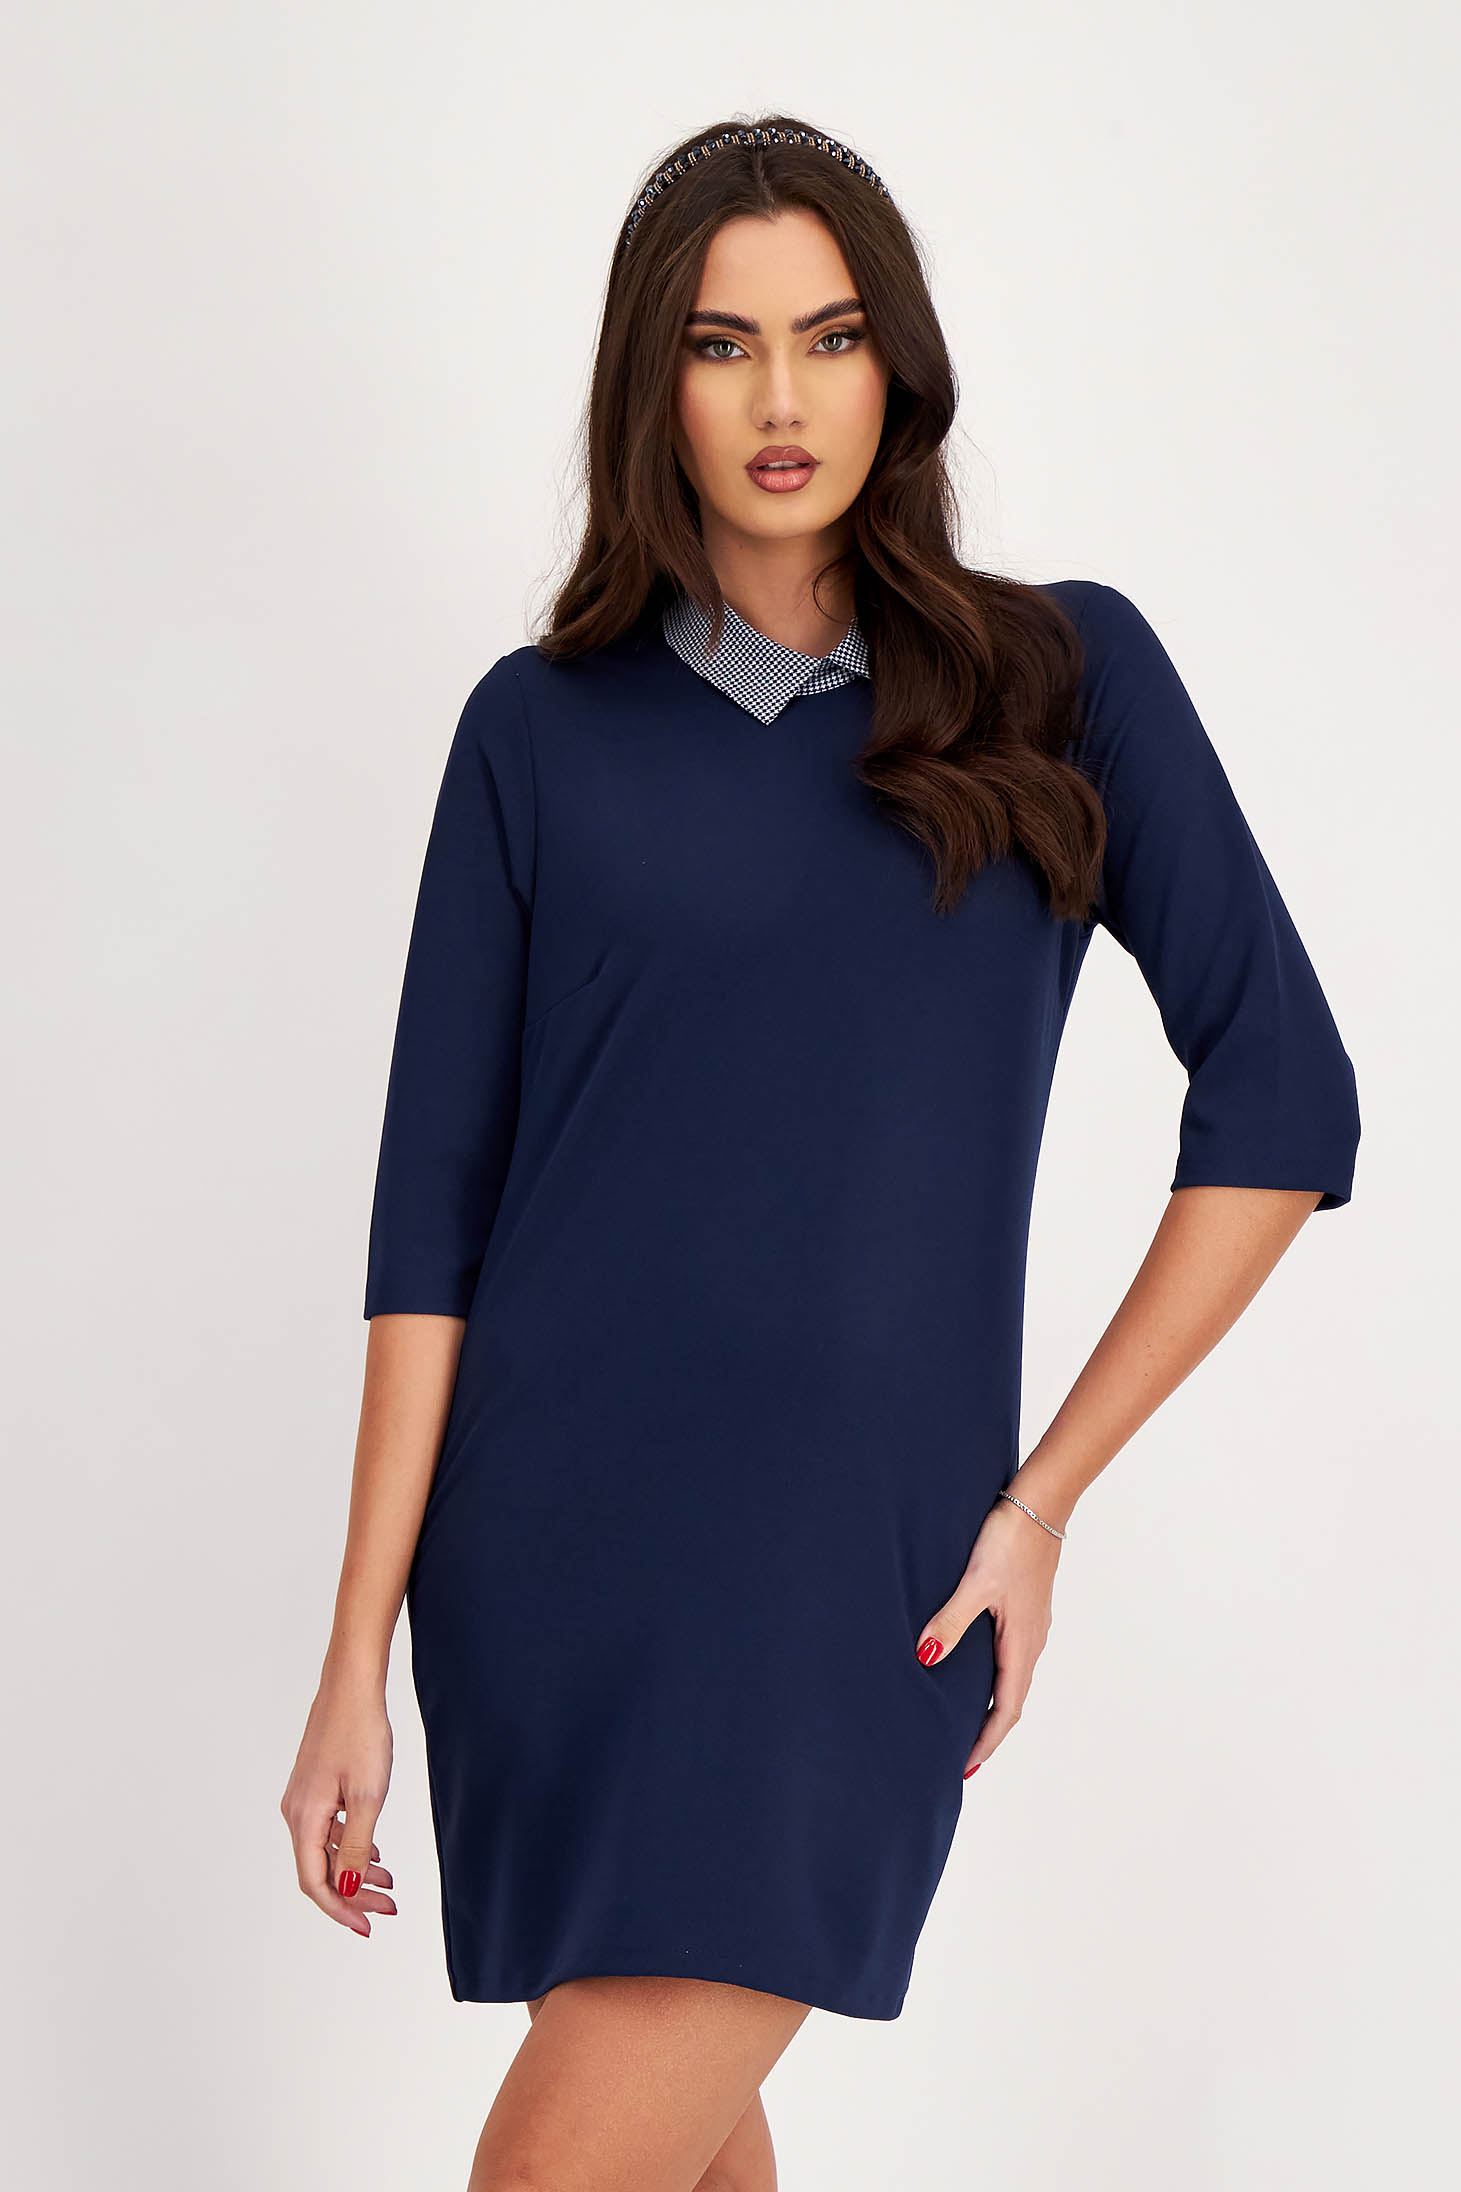 Navy blue crepe dress with a straight cut and shirt-style collar - SunShine